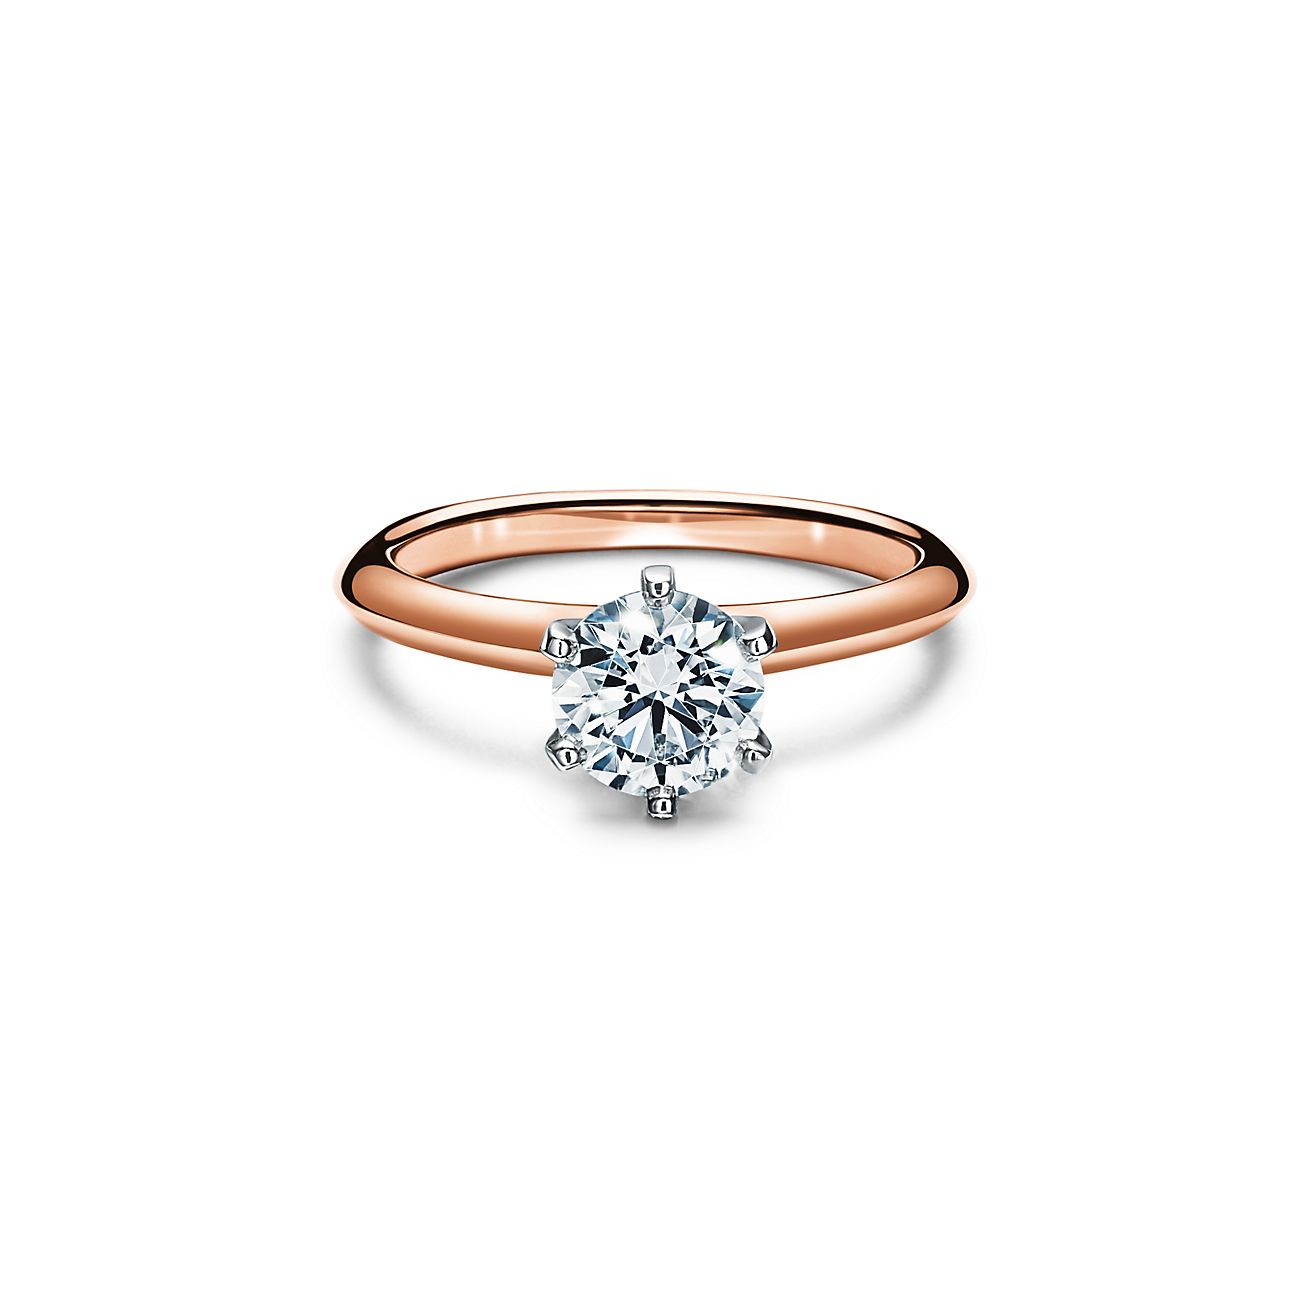 The Tiffany® Setting in 18k rose gold 